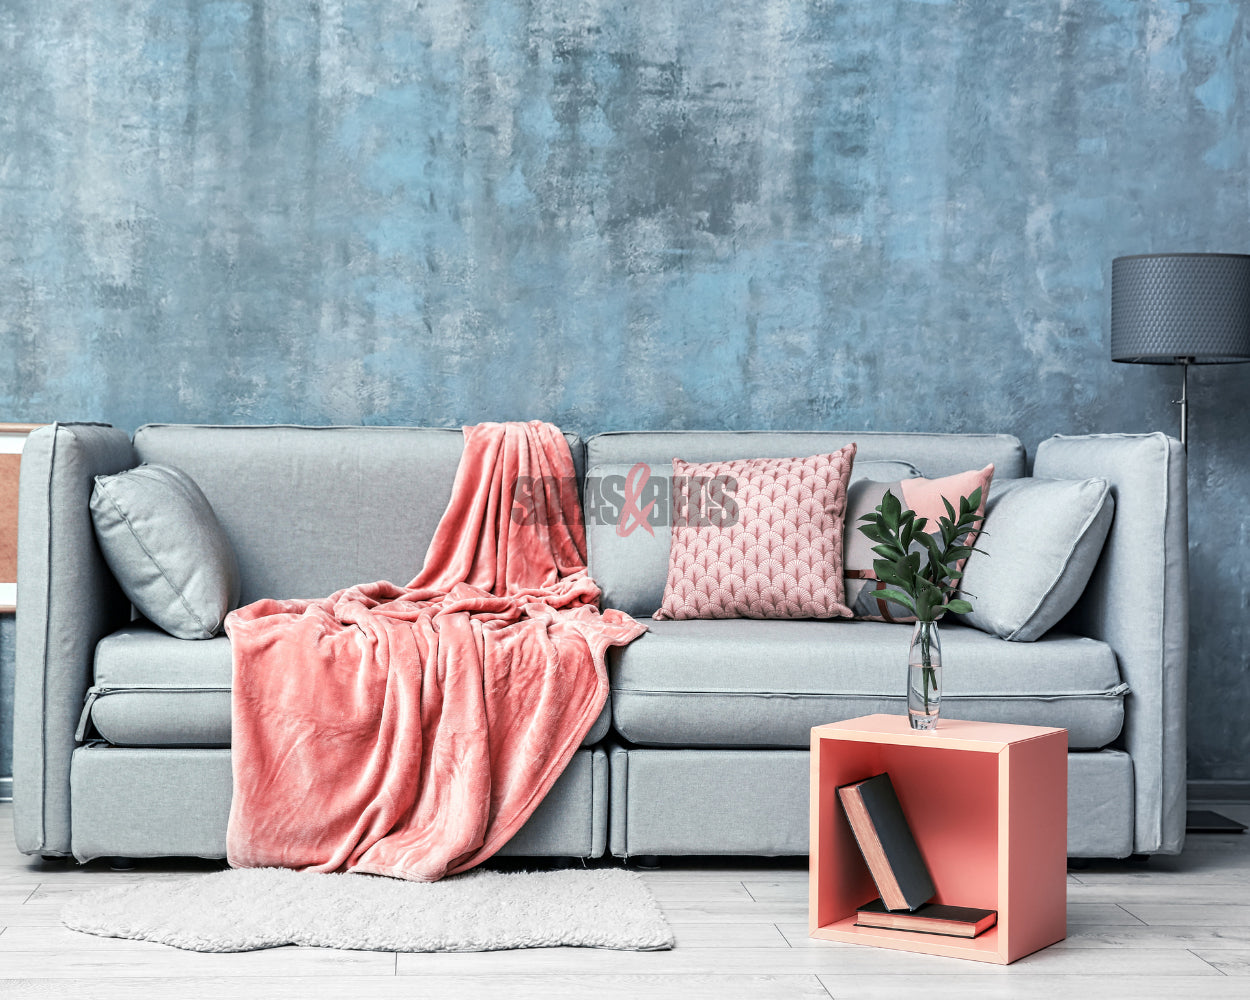 A grey sofa in pink background | Sofas & Beds